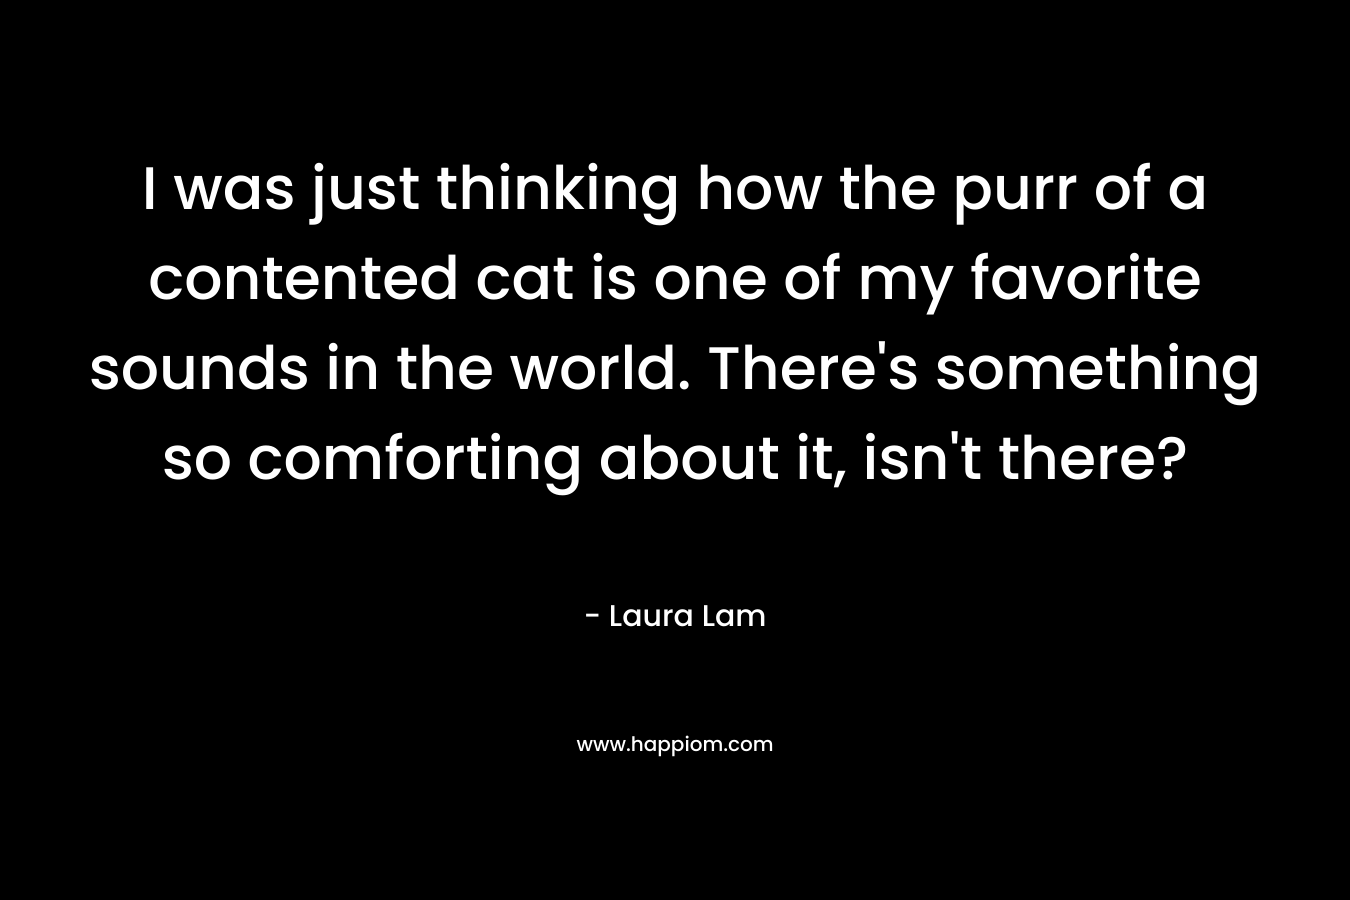 I was just thinking how the purr of a contented cat is one of my favorite sounds in the world. There's something so comforting about it, isn't there?